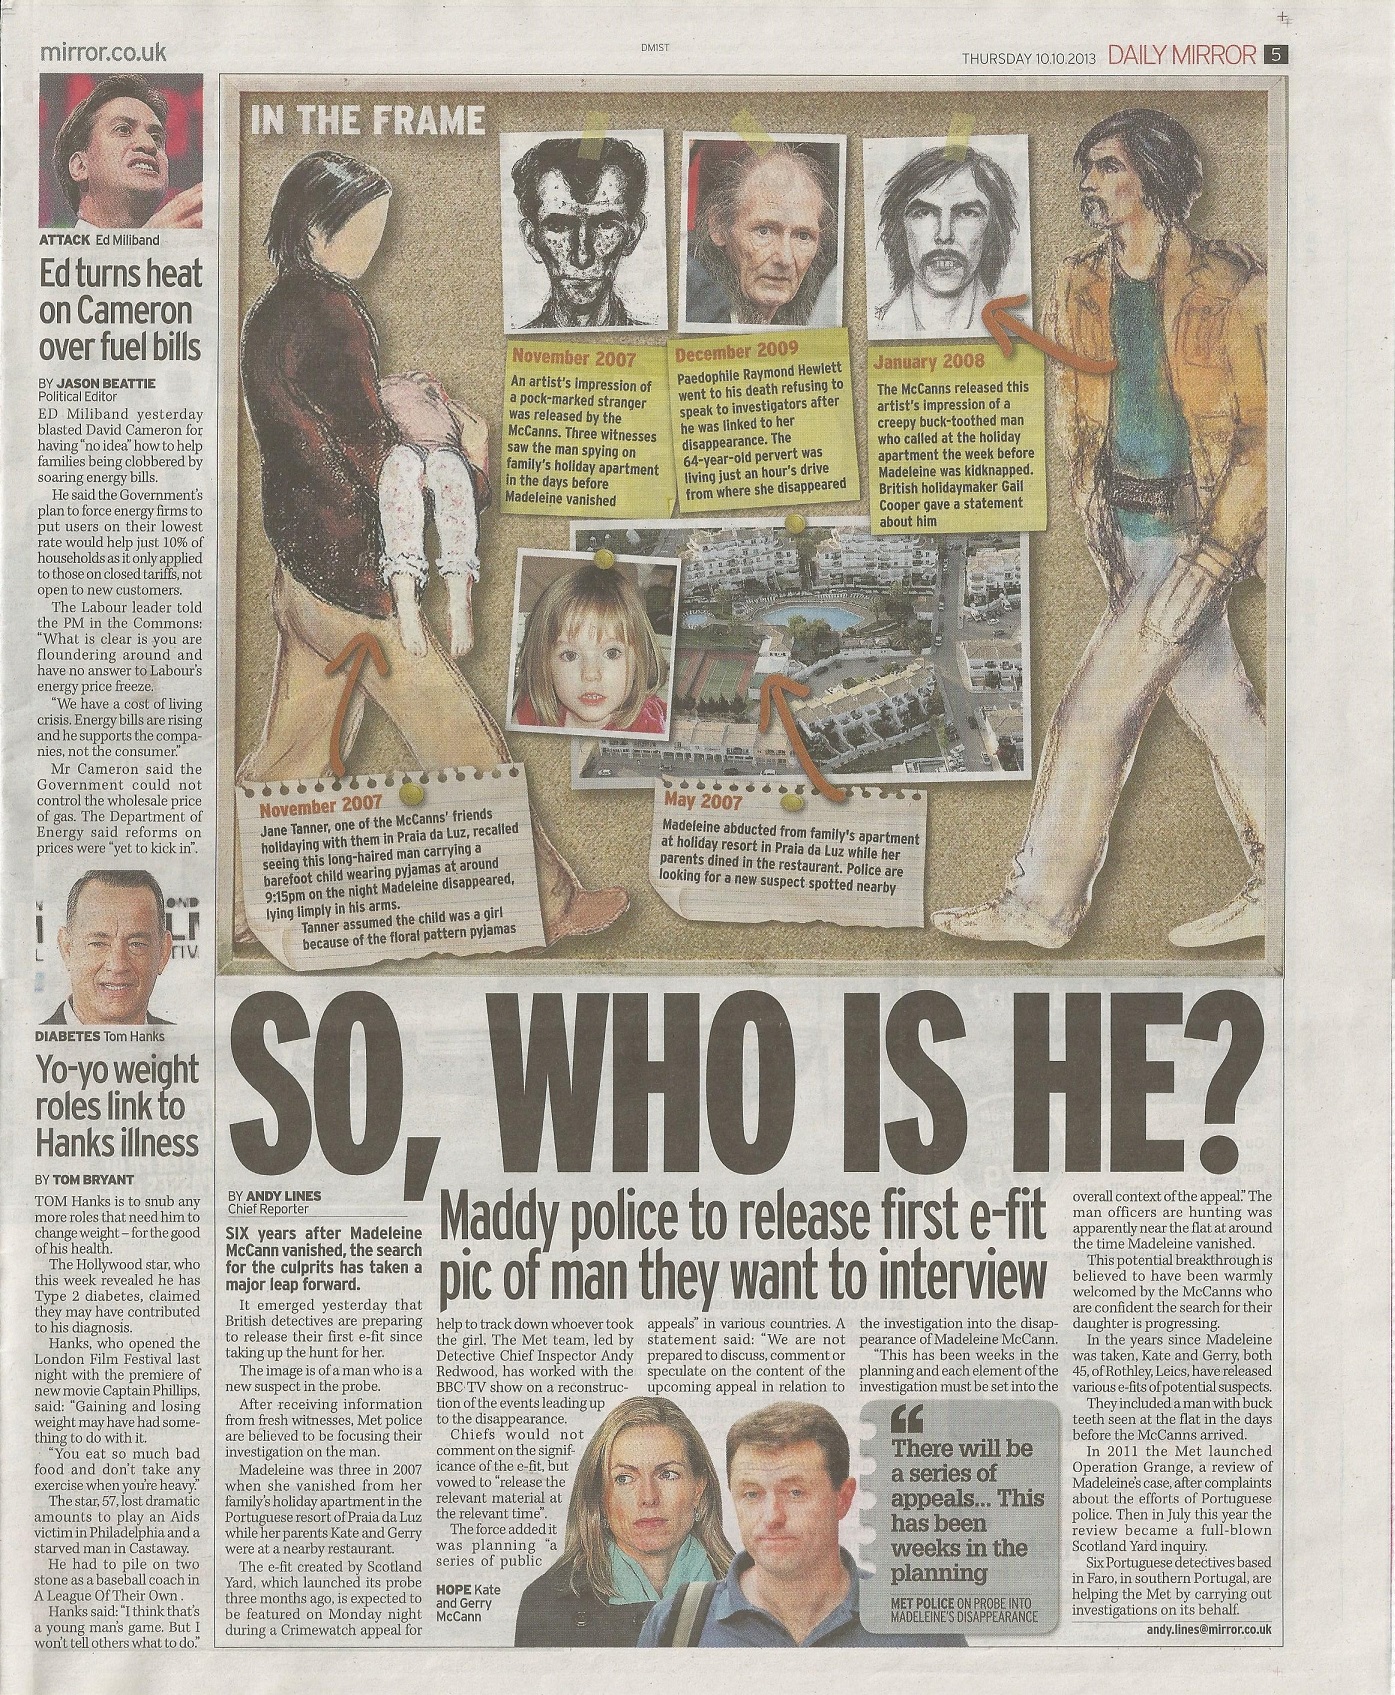 Daily Mirror, paper edition, 10 October 2013